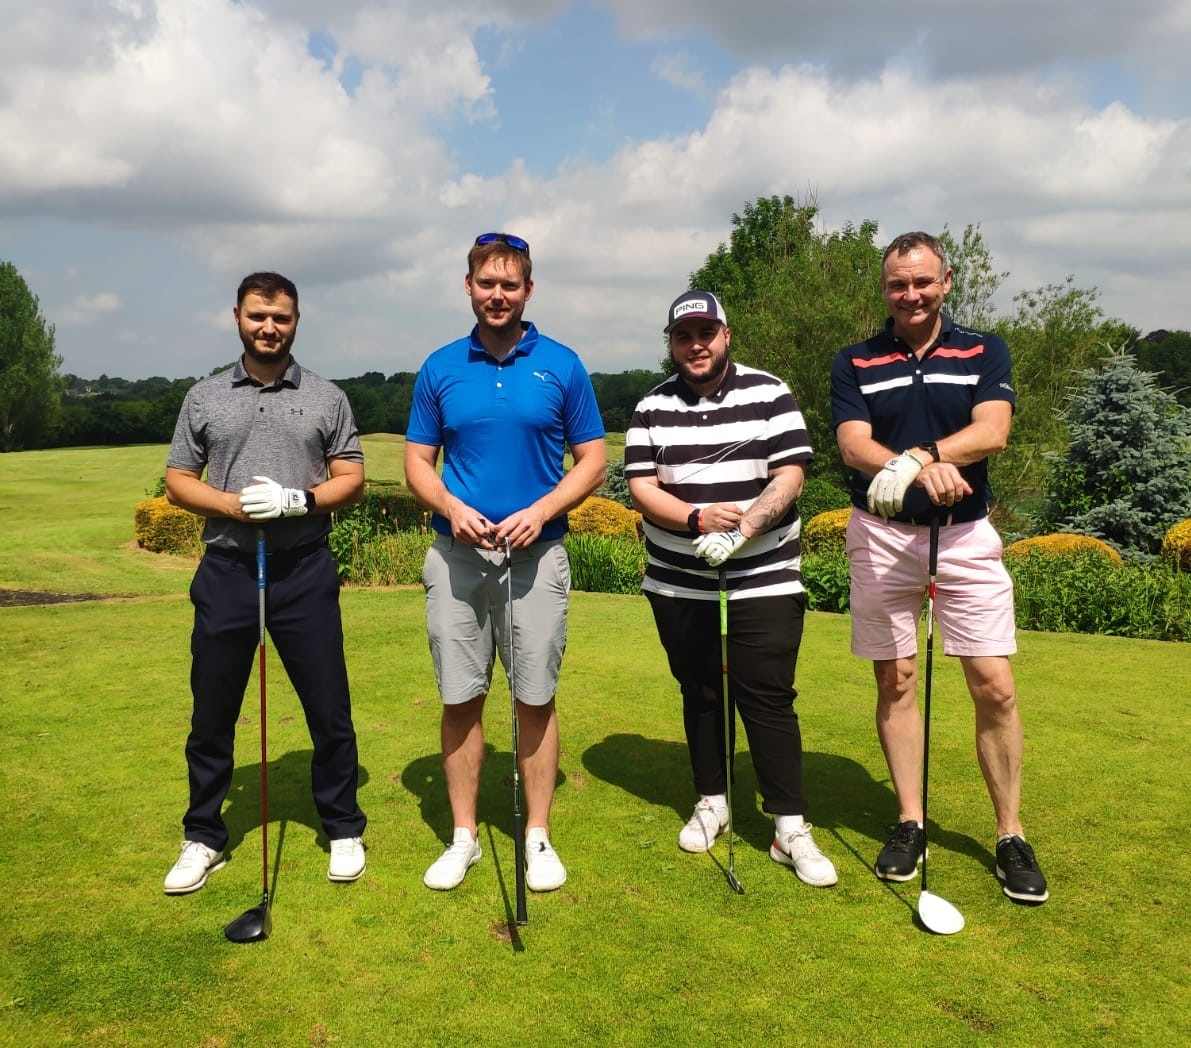 Wain Homes Golf Day raises £8,000 for Grief Encounter